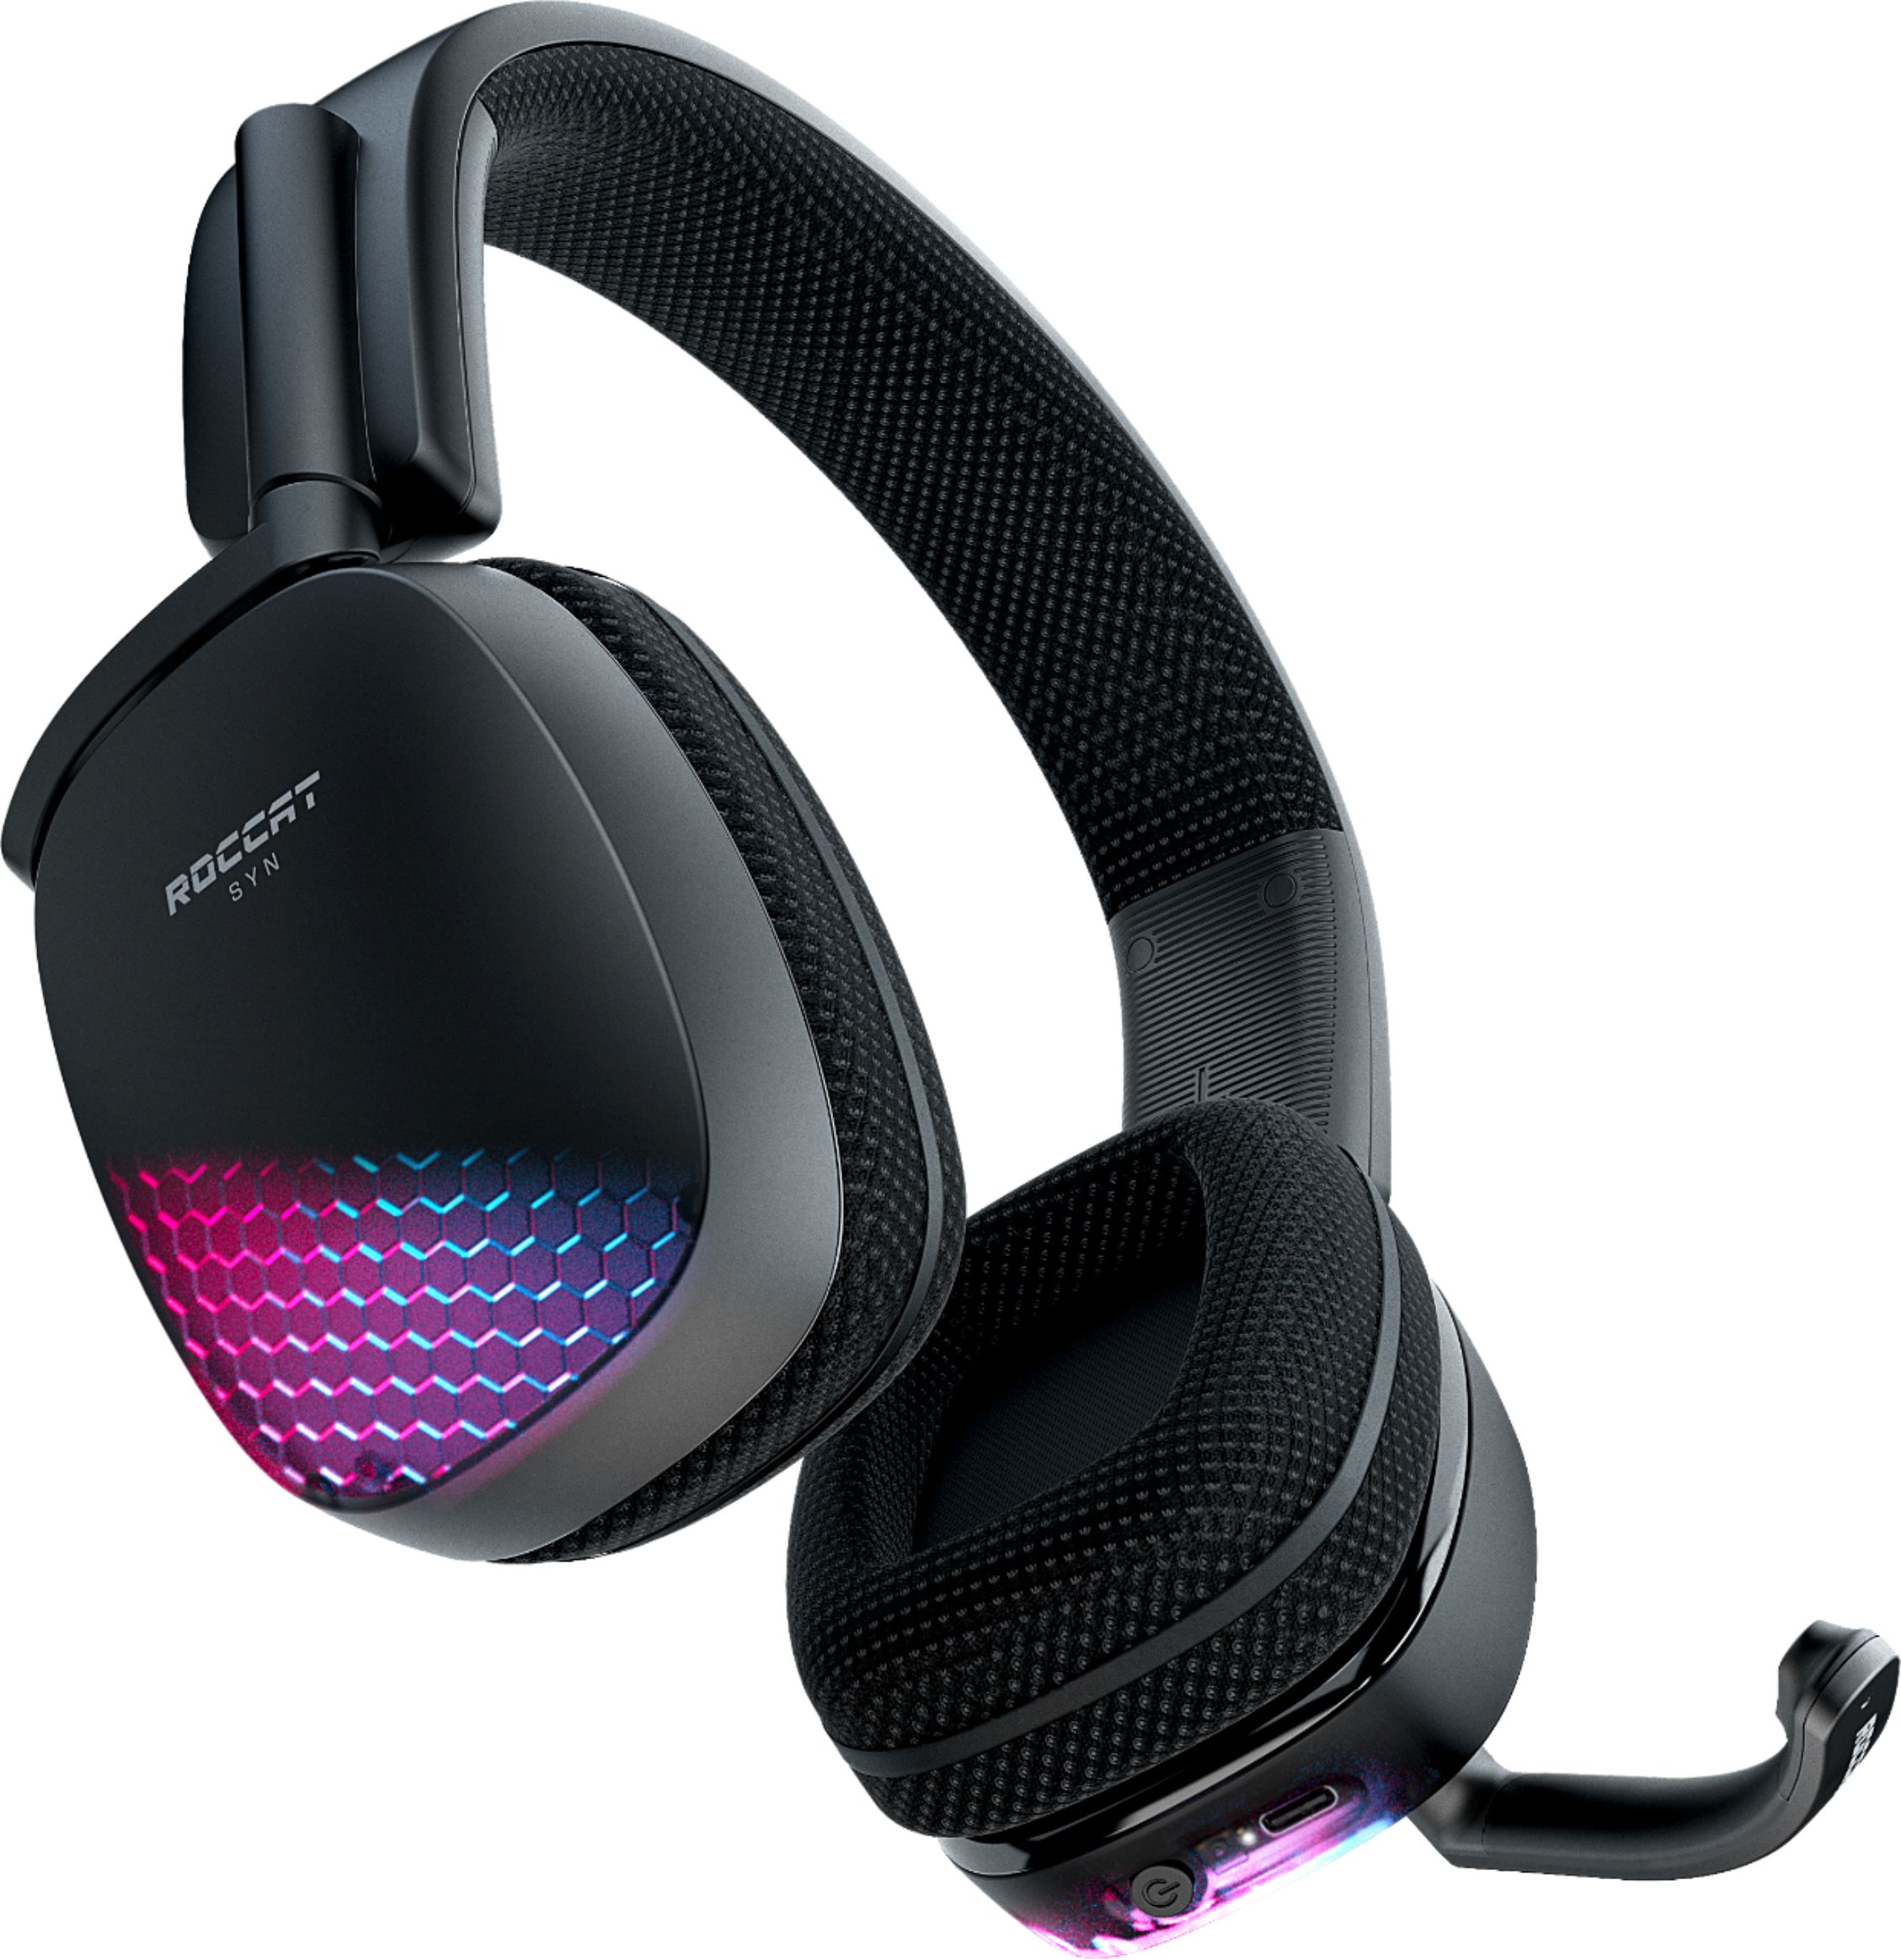 Angle View: ROCCAT - Syn Pro Air Lightweight RGB Wireless 3D Audio Surround Sound Gaming Headset for PC with AIMO Lighting, 24-Hour Battery - Black